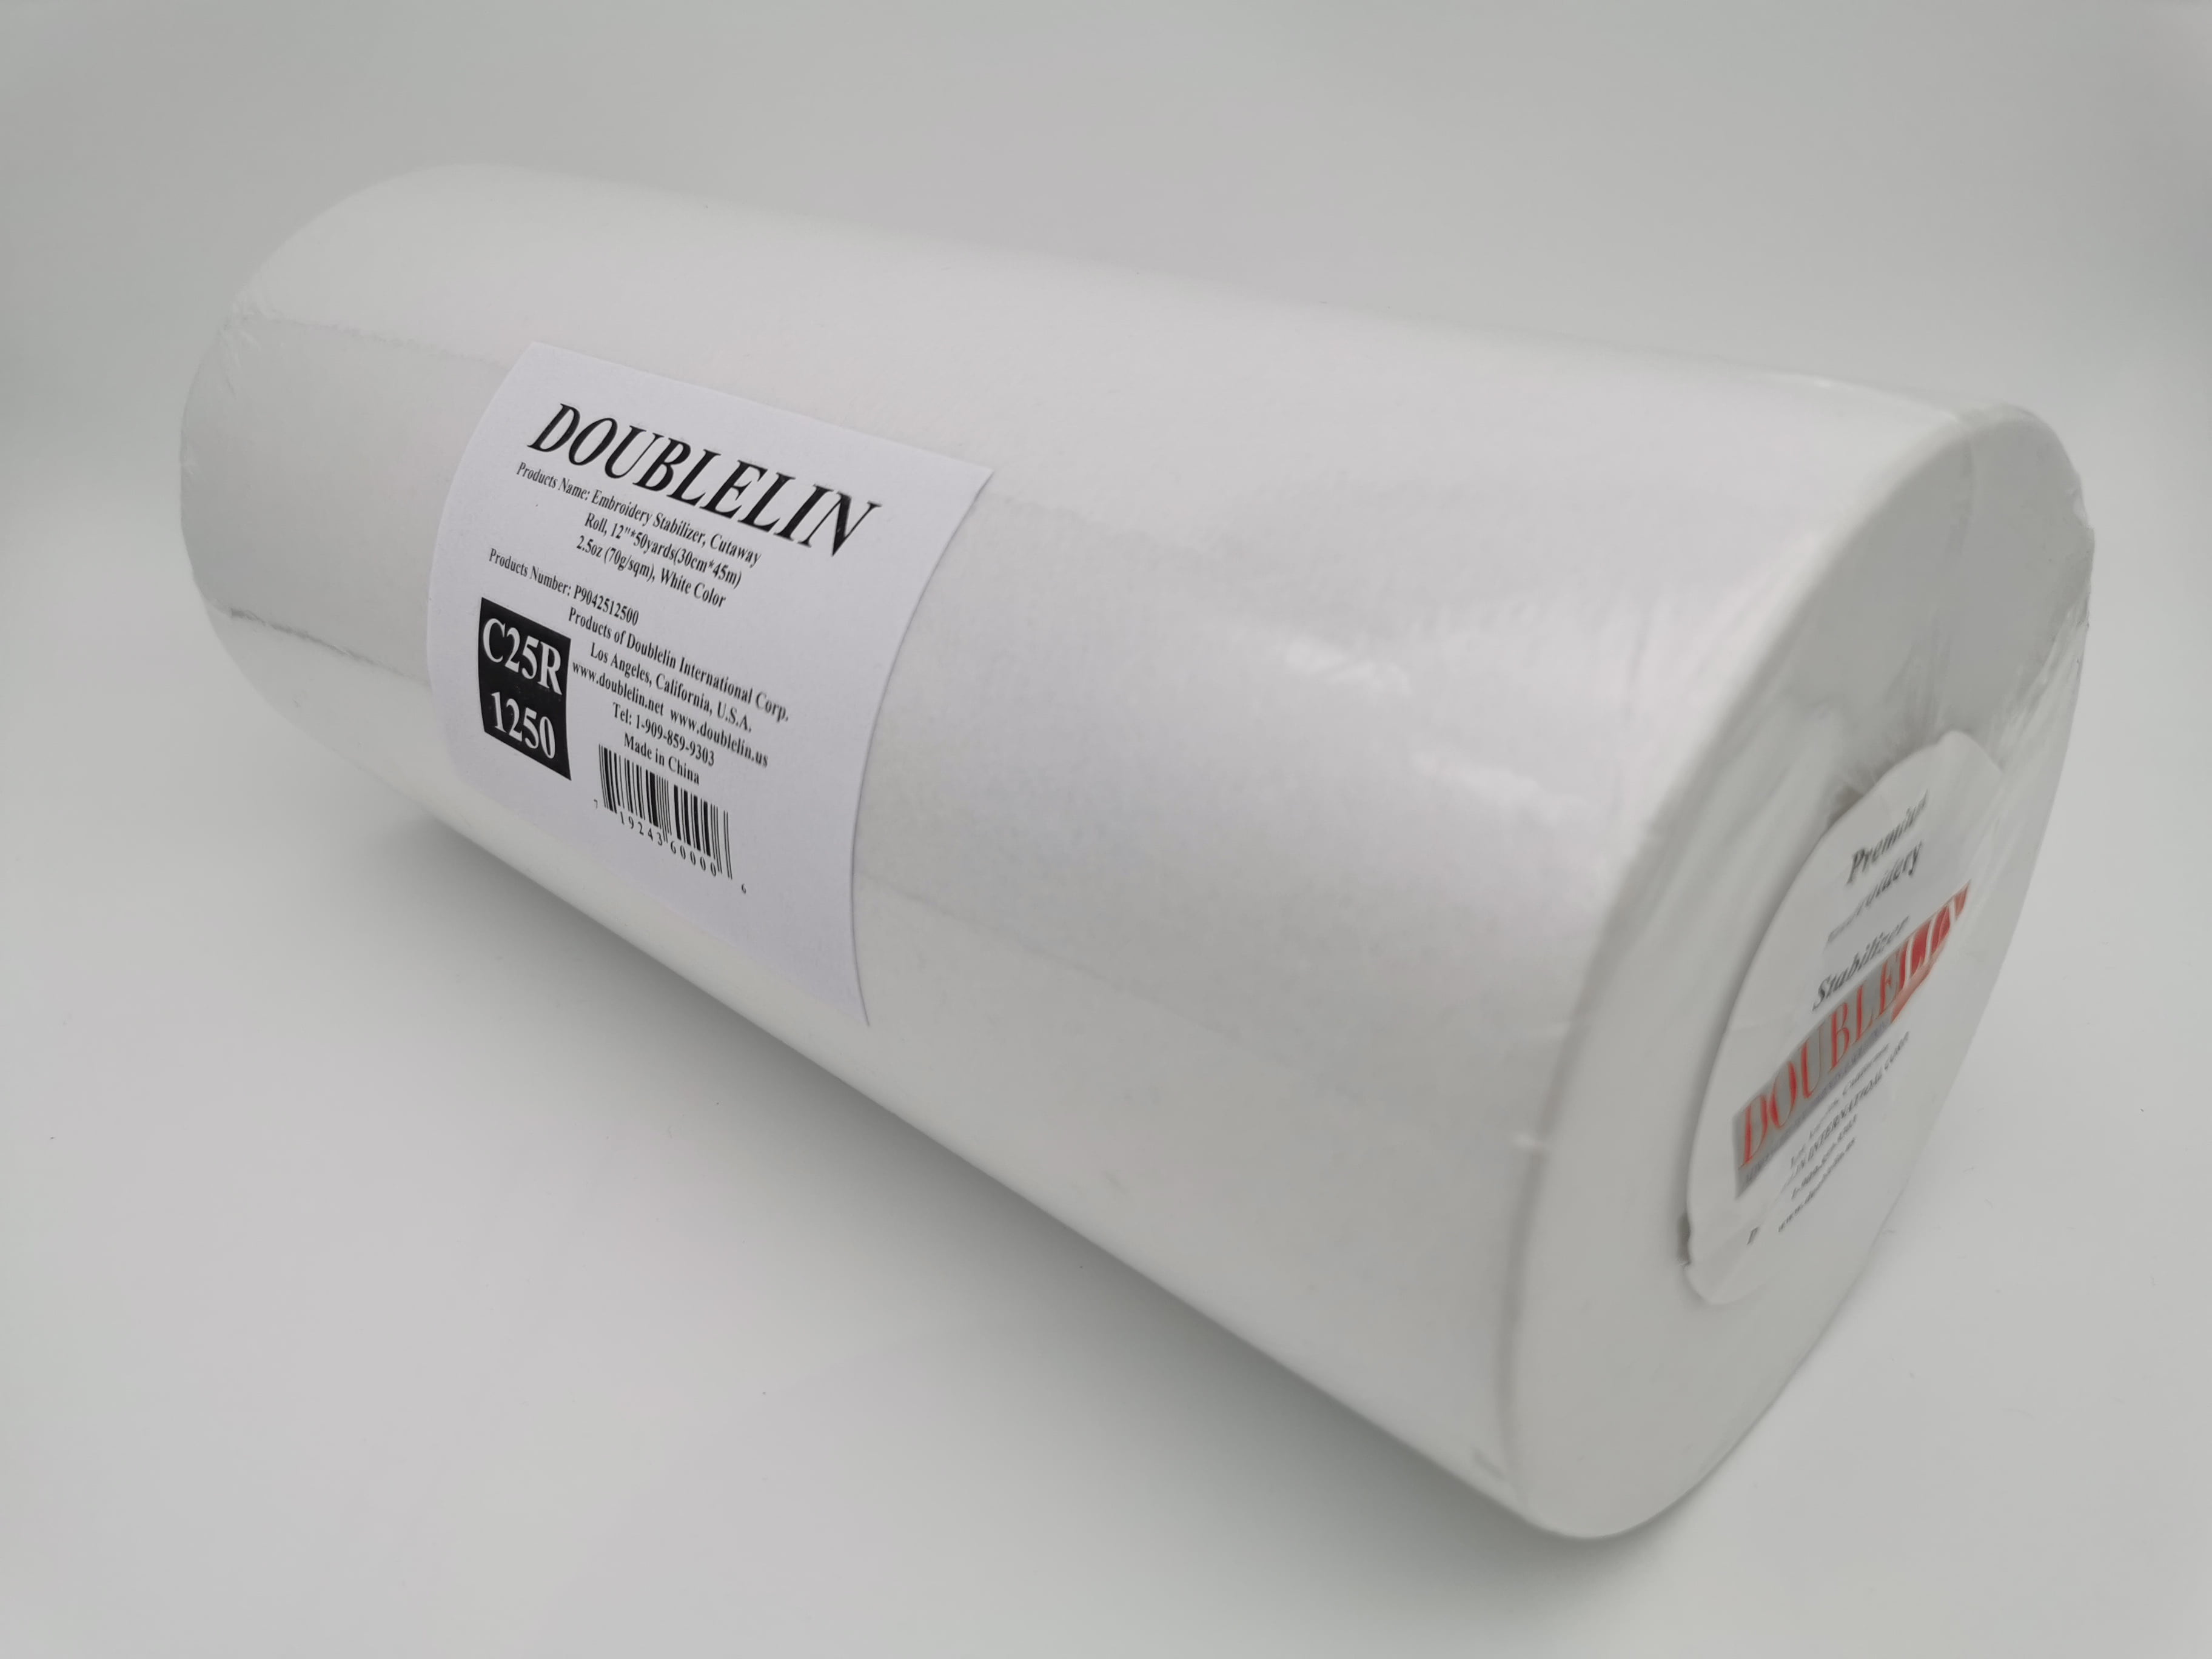 Cut Away Embroidery Stabilizer 12” x 50 Yard Roll – 2.5 Ounce Cutaway for Machine Embroidery